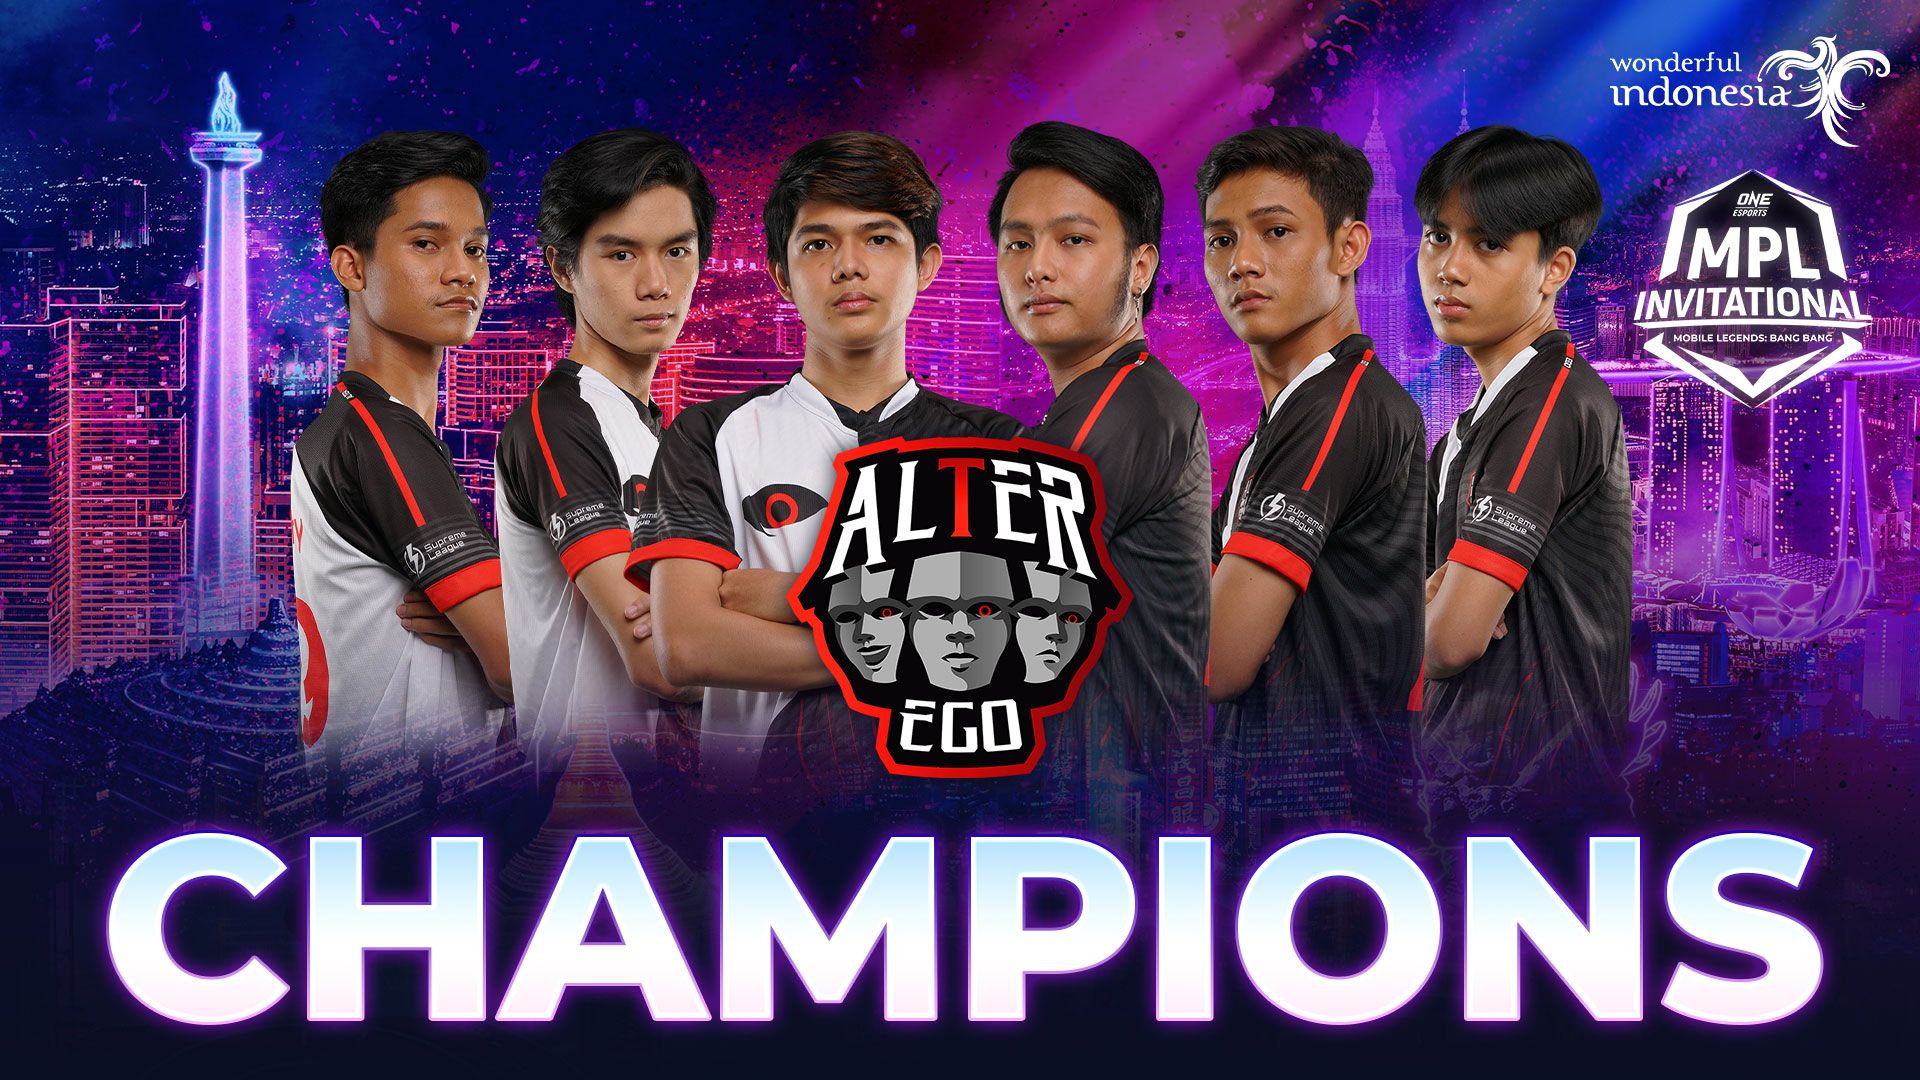 Alter Ego wins the ONE Esports MPL Invitational with a perfect 11-0 record